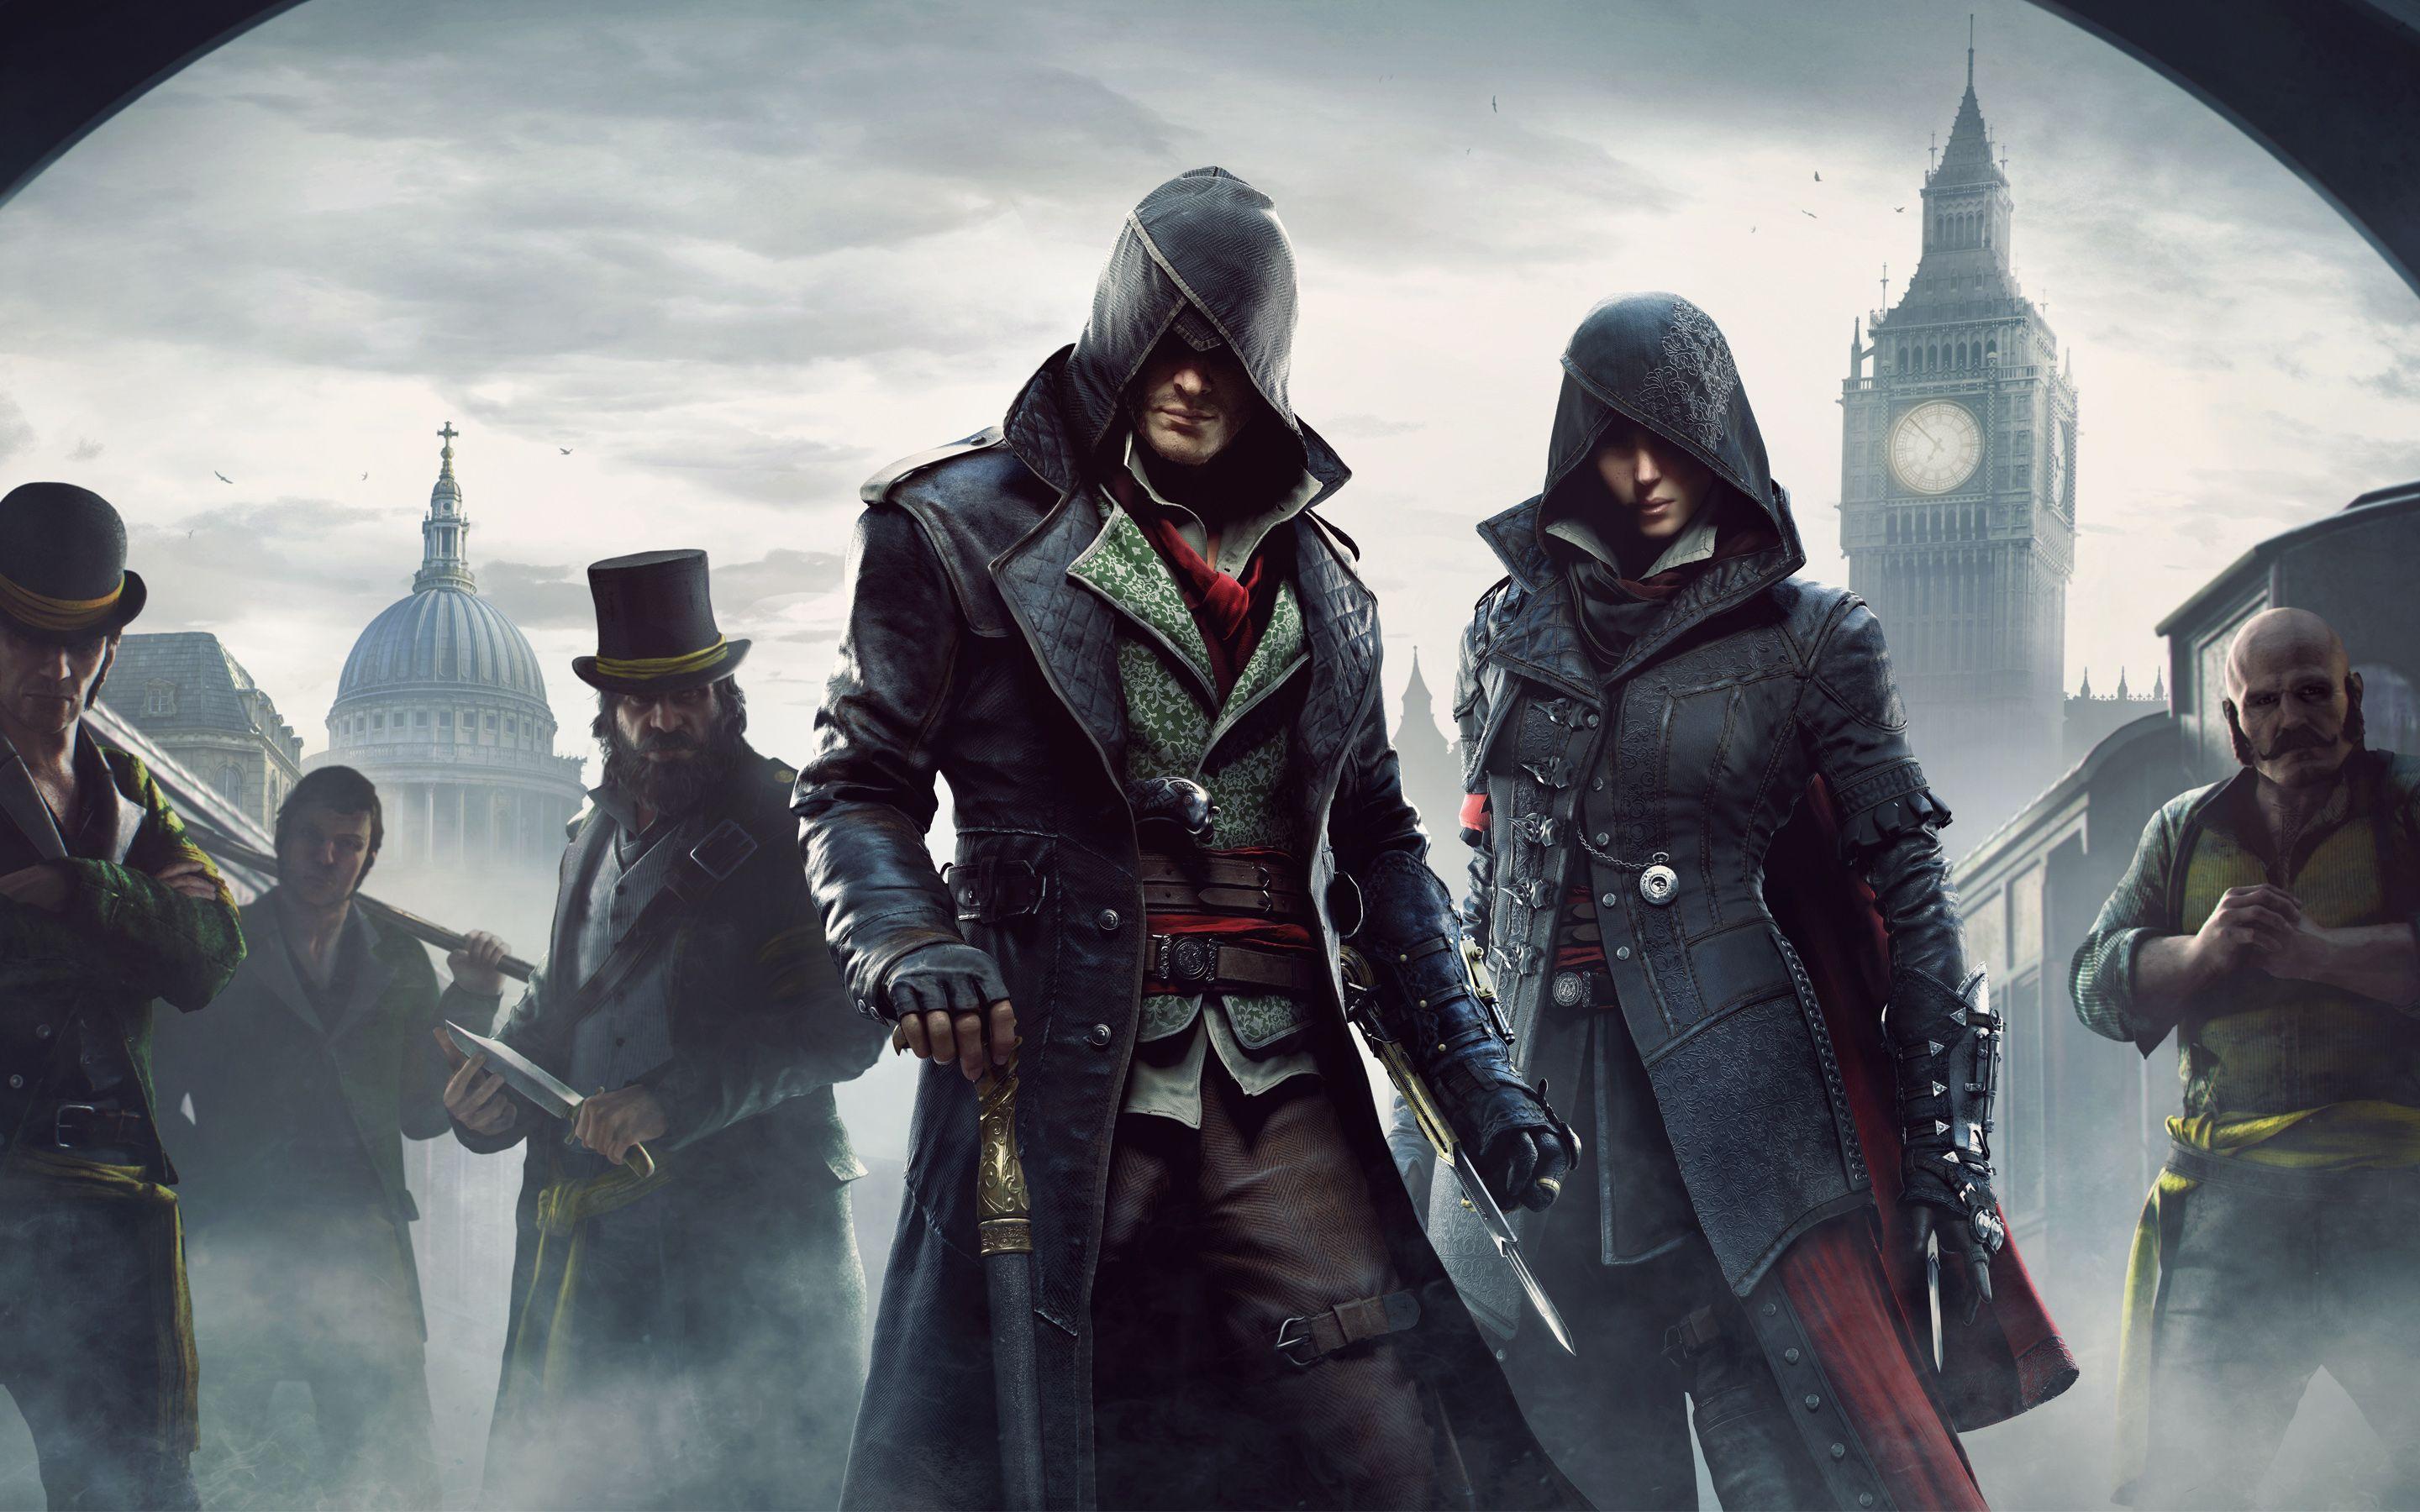 Assassin&Creed: Syndicate HD wallpapers free download